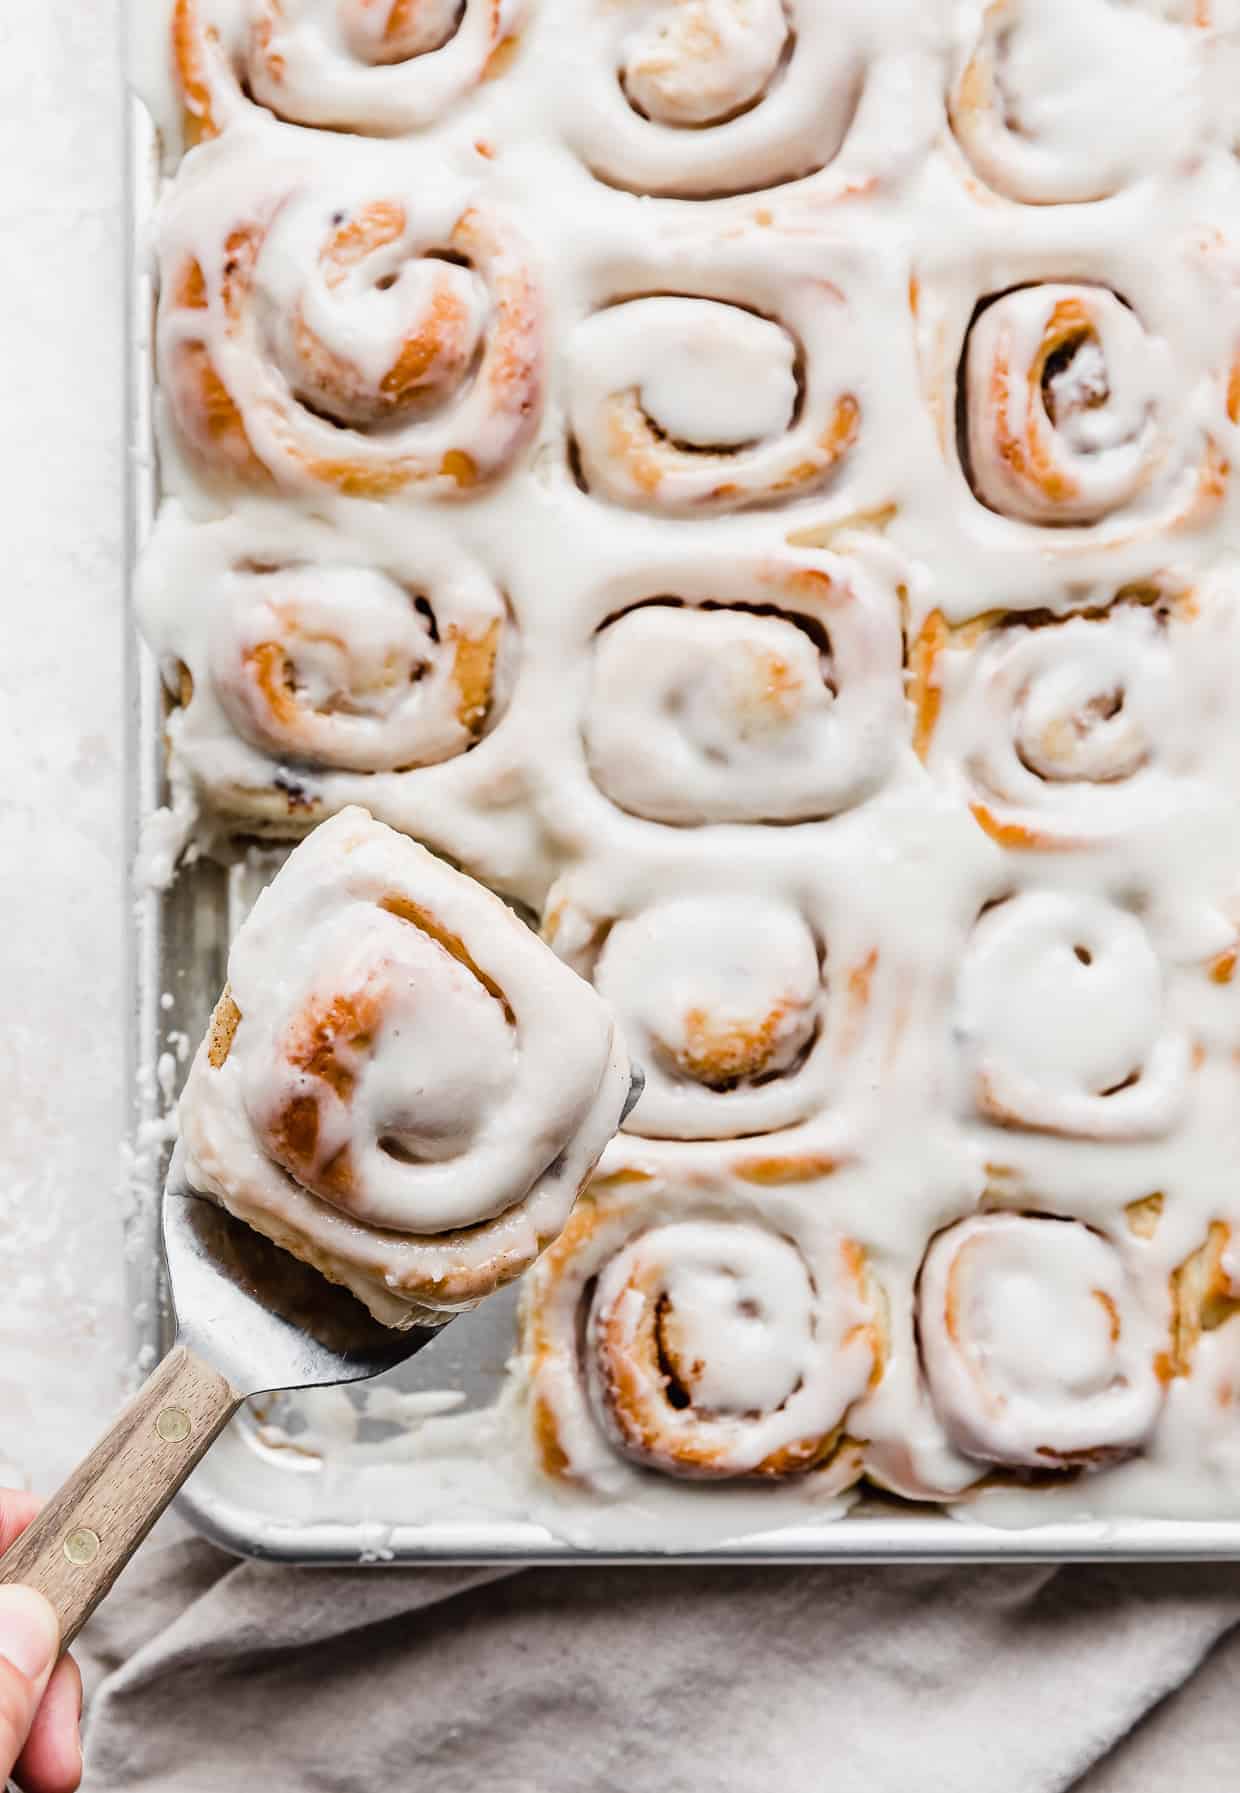 A spatula holding up a mini cinnamon roll with a baking sheet full of others in the background.